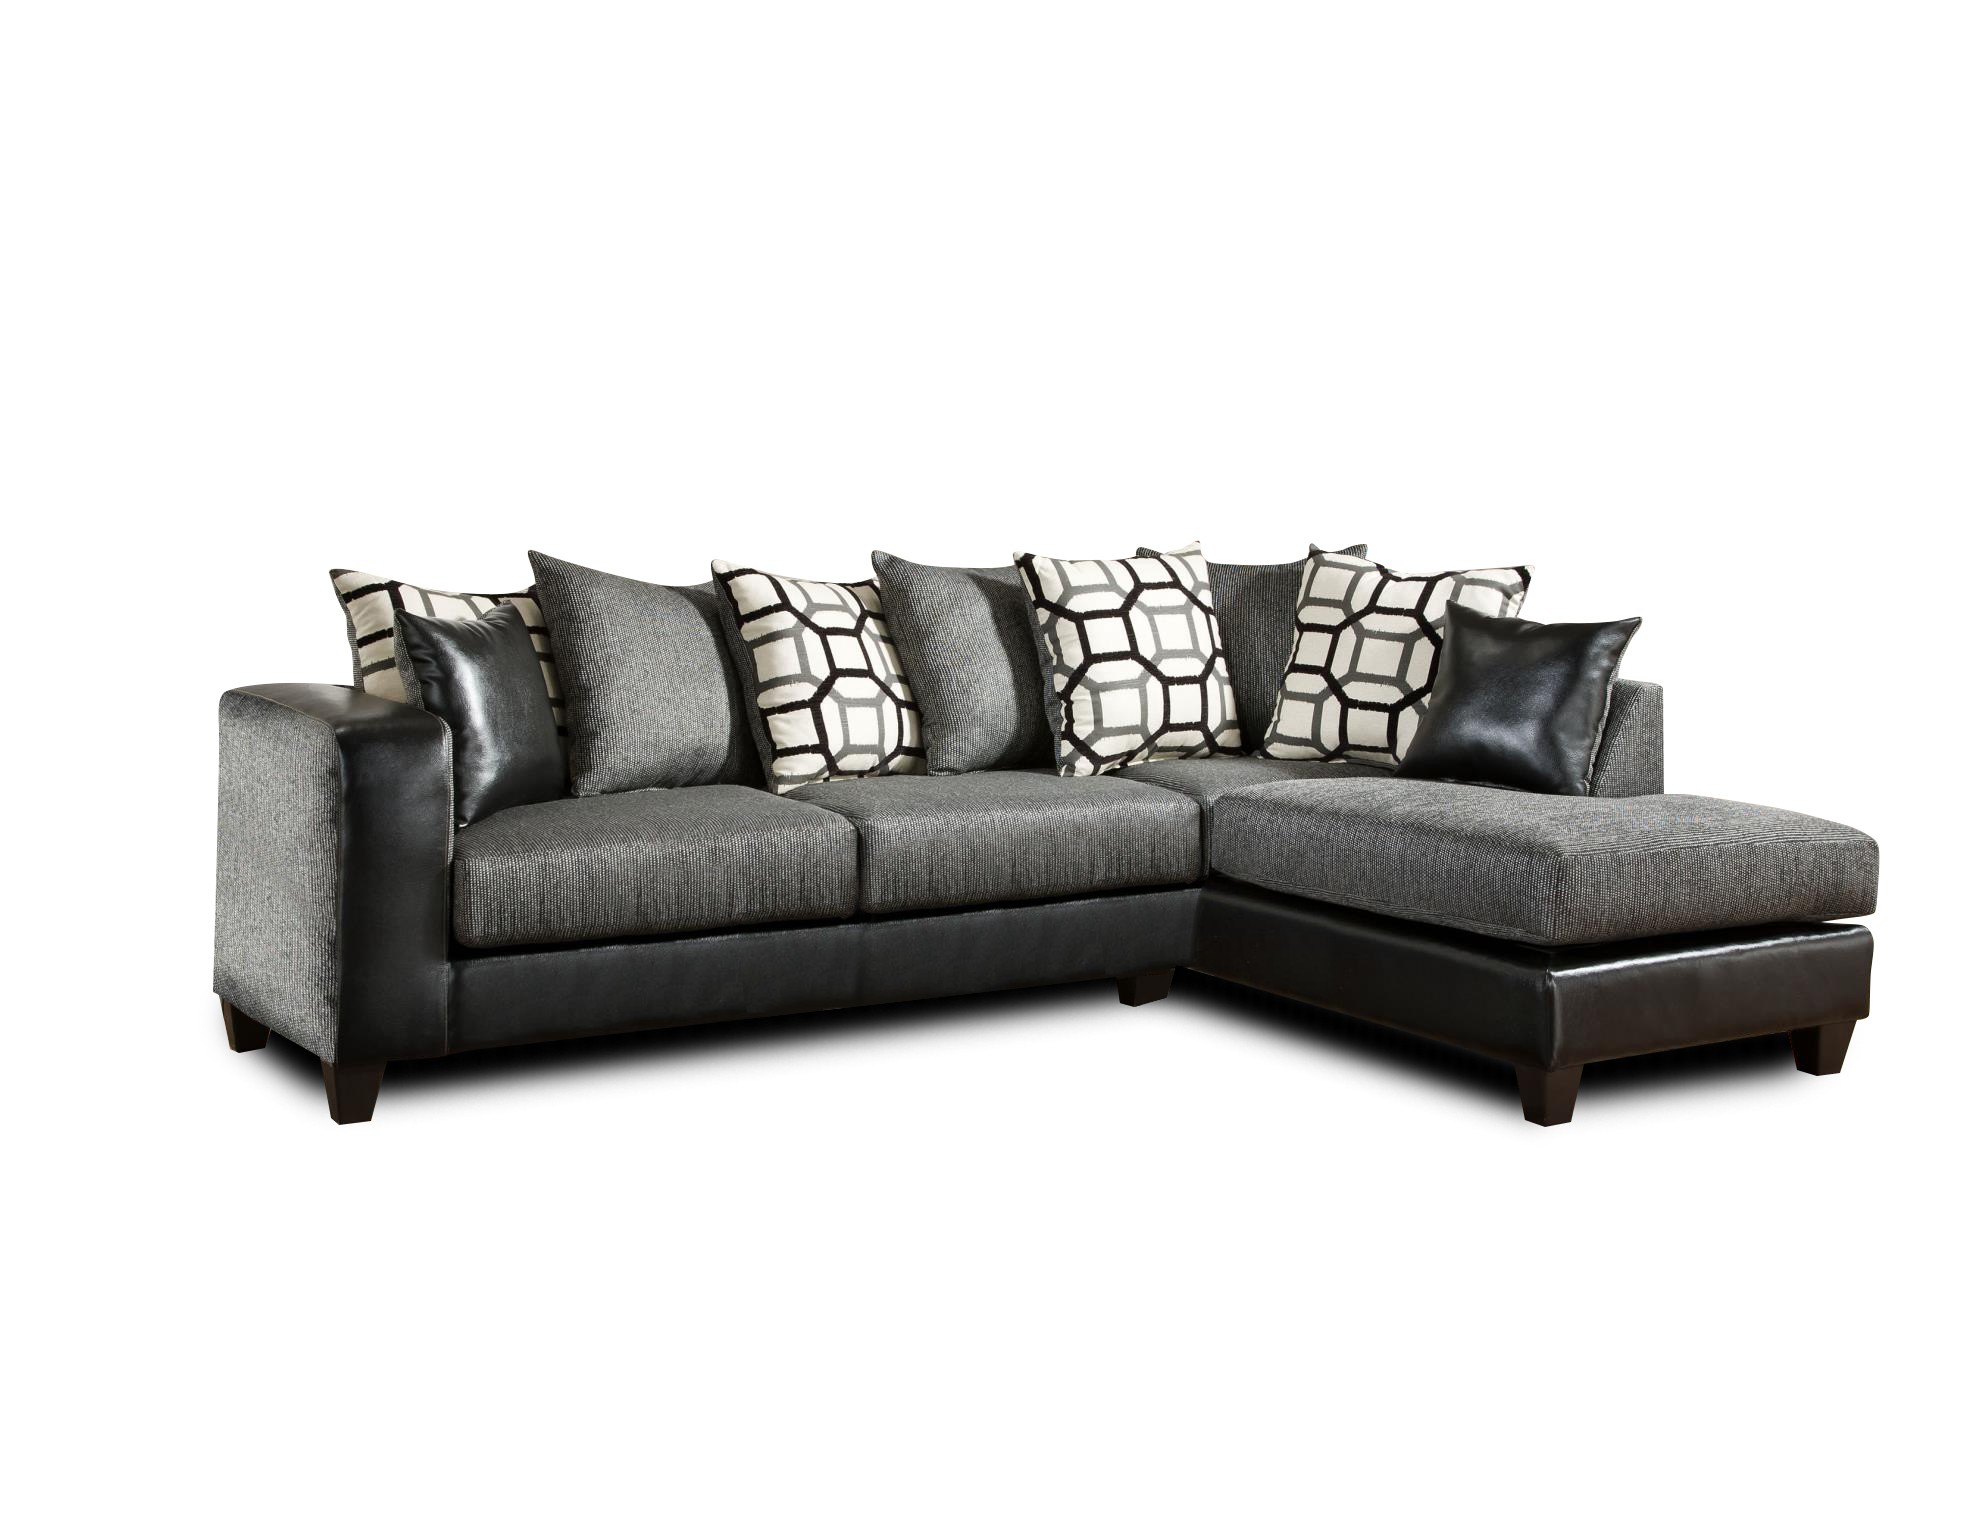 110" X 73" X 37" Object Charcoal Dempsey Blacke 100% Polyester Sectional